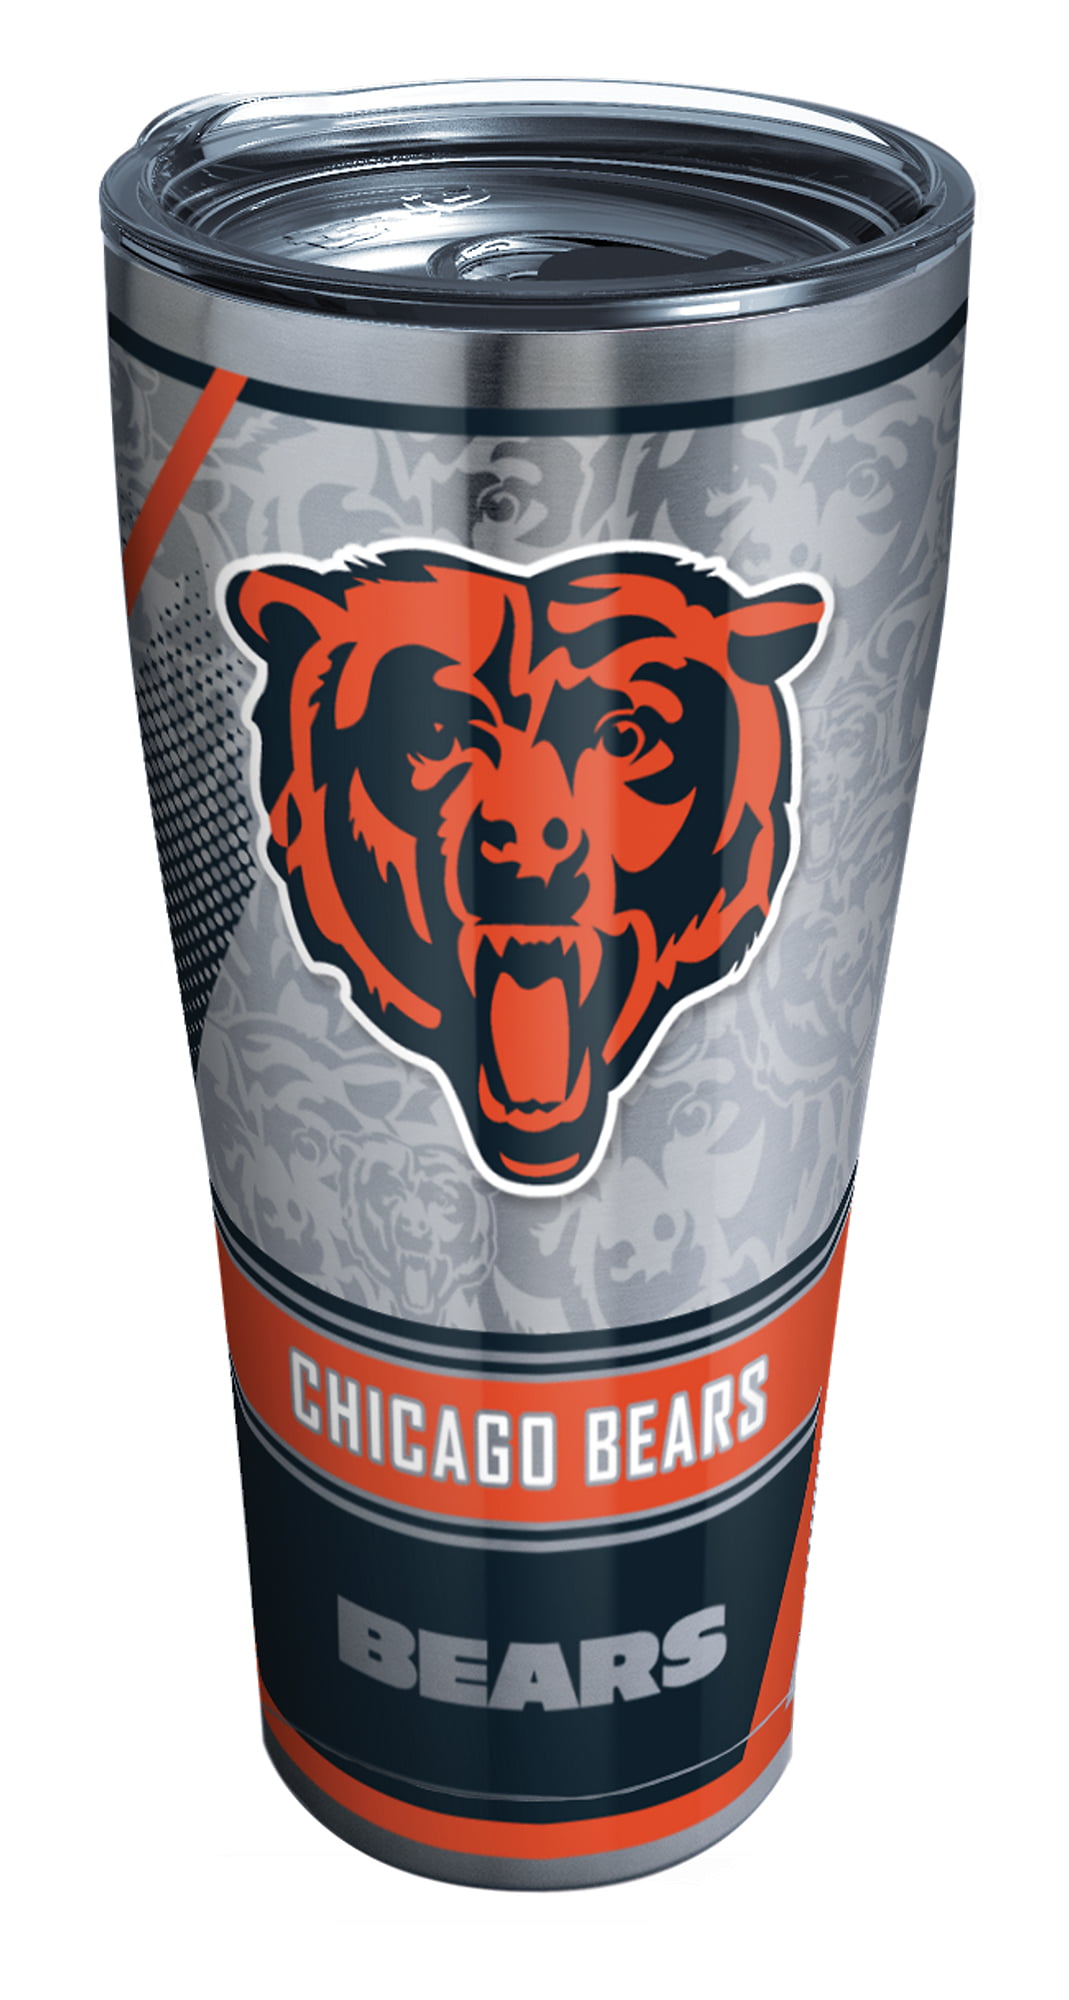 Tervis Made in USA Double Walled NFL Chicago Bears Insulated Tumbler Cup  Keeps Drinks Cold & Hot, 16oz Mug - Orange Lid, Primary Logo